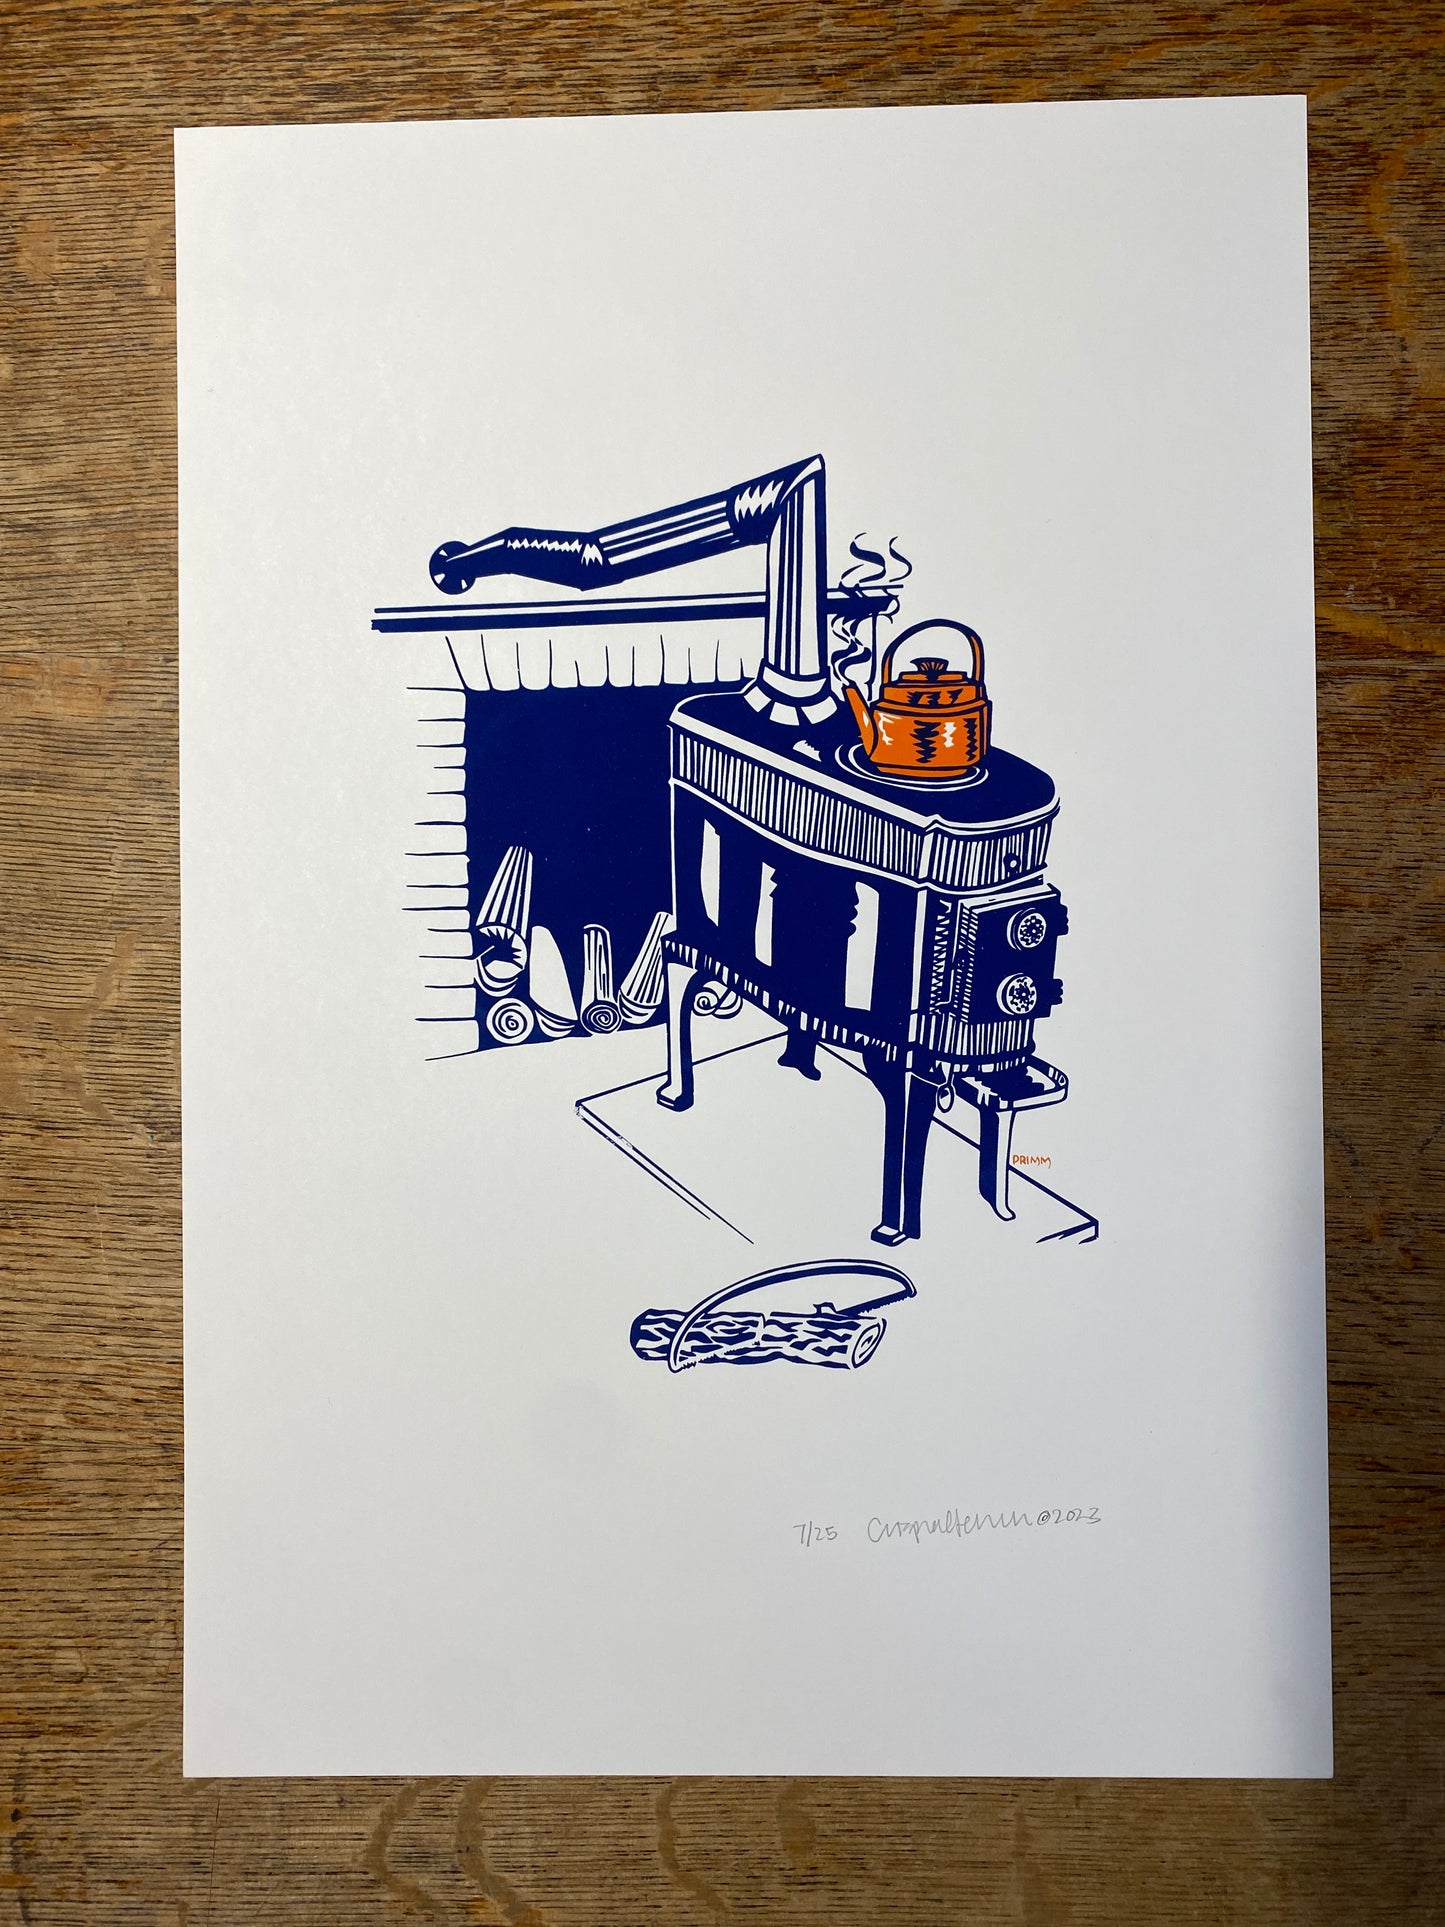 KETTLE ON WOOD STOVE - PRIMM FFRENCH ARTWORK PRINT 13” X 19”